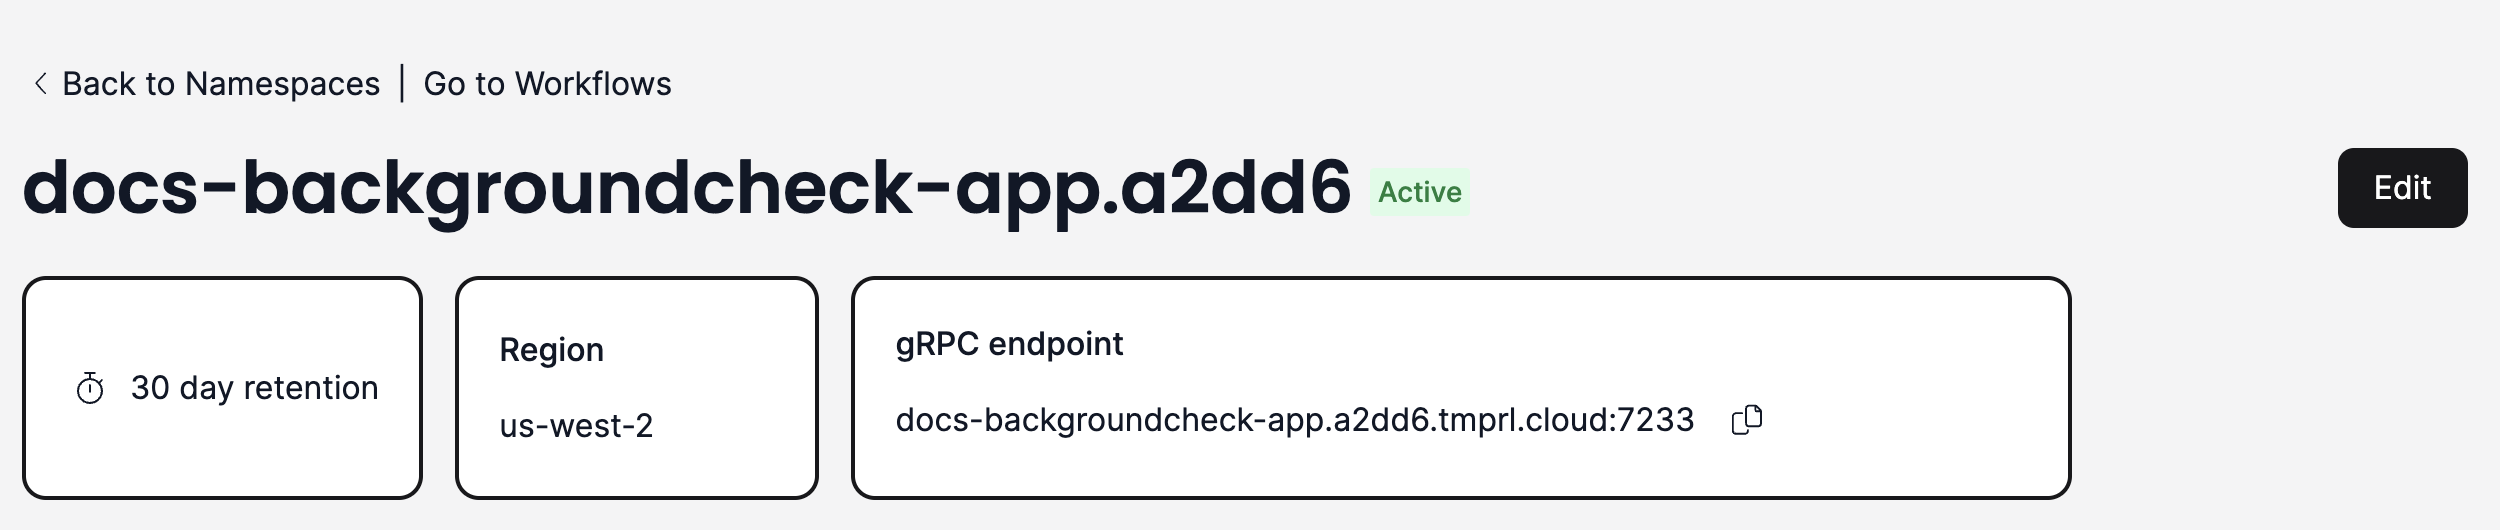 Copy your gRPC endpoint from the UI